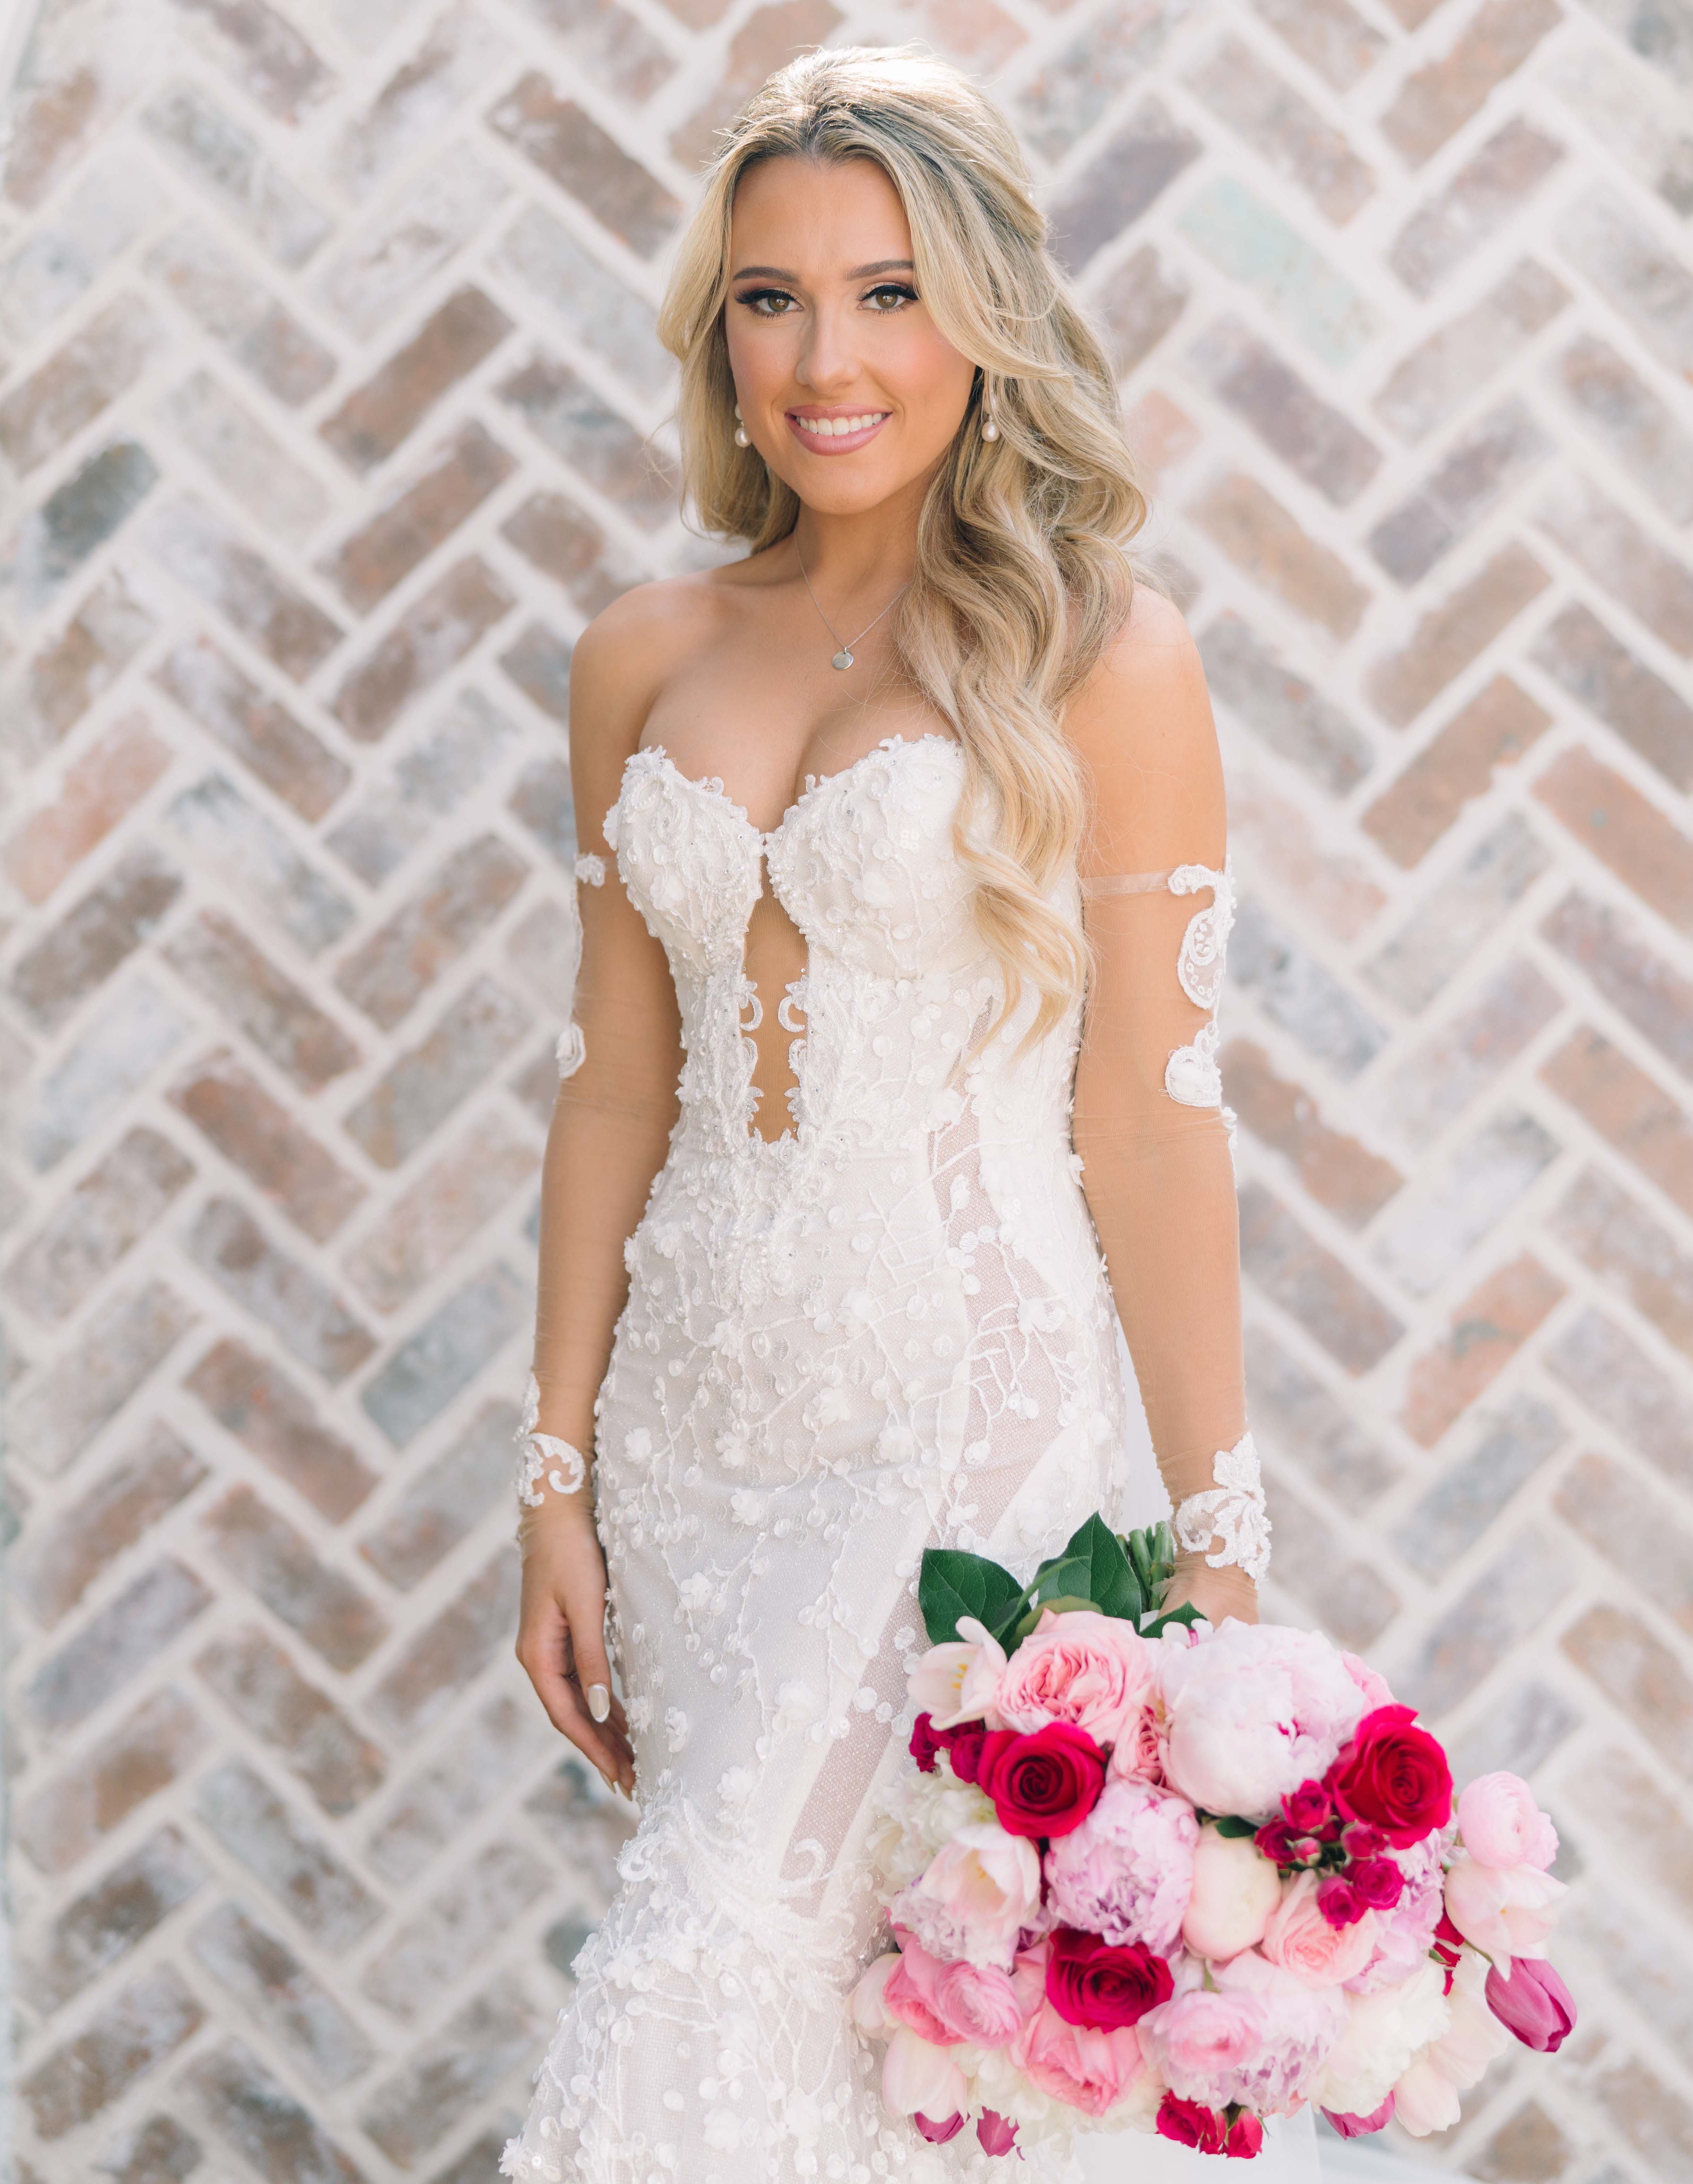 A bride smiles in a Galia Lahav gown and is holding a bright pink bridal bouquet for her Summer Wedding With a Vibrant Palette of Pink.